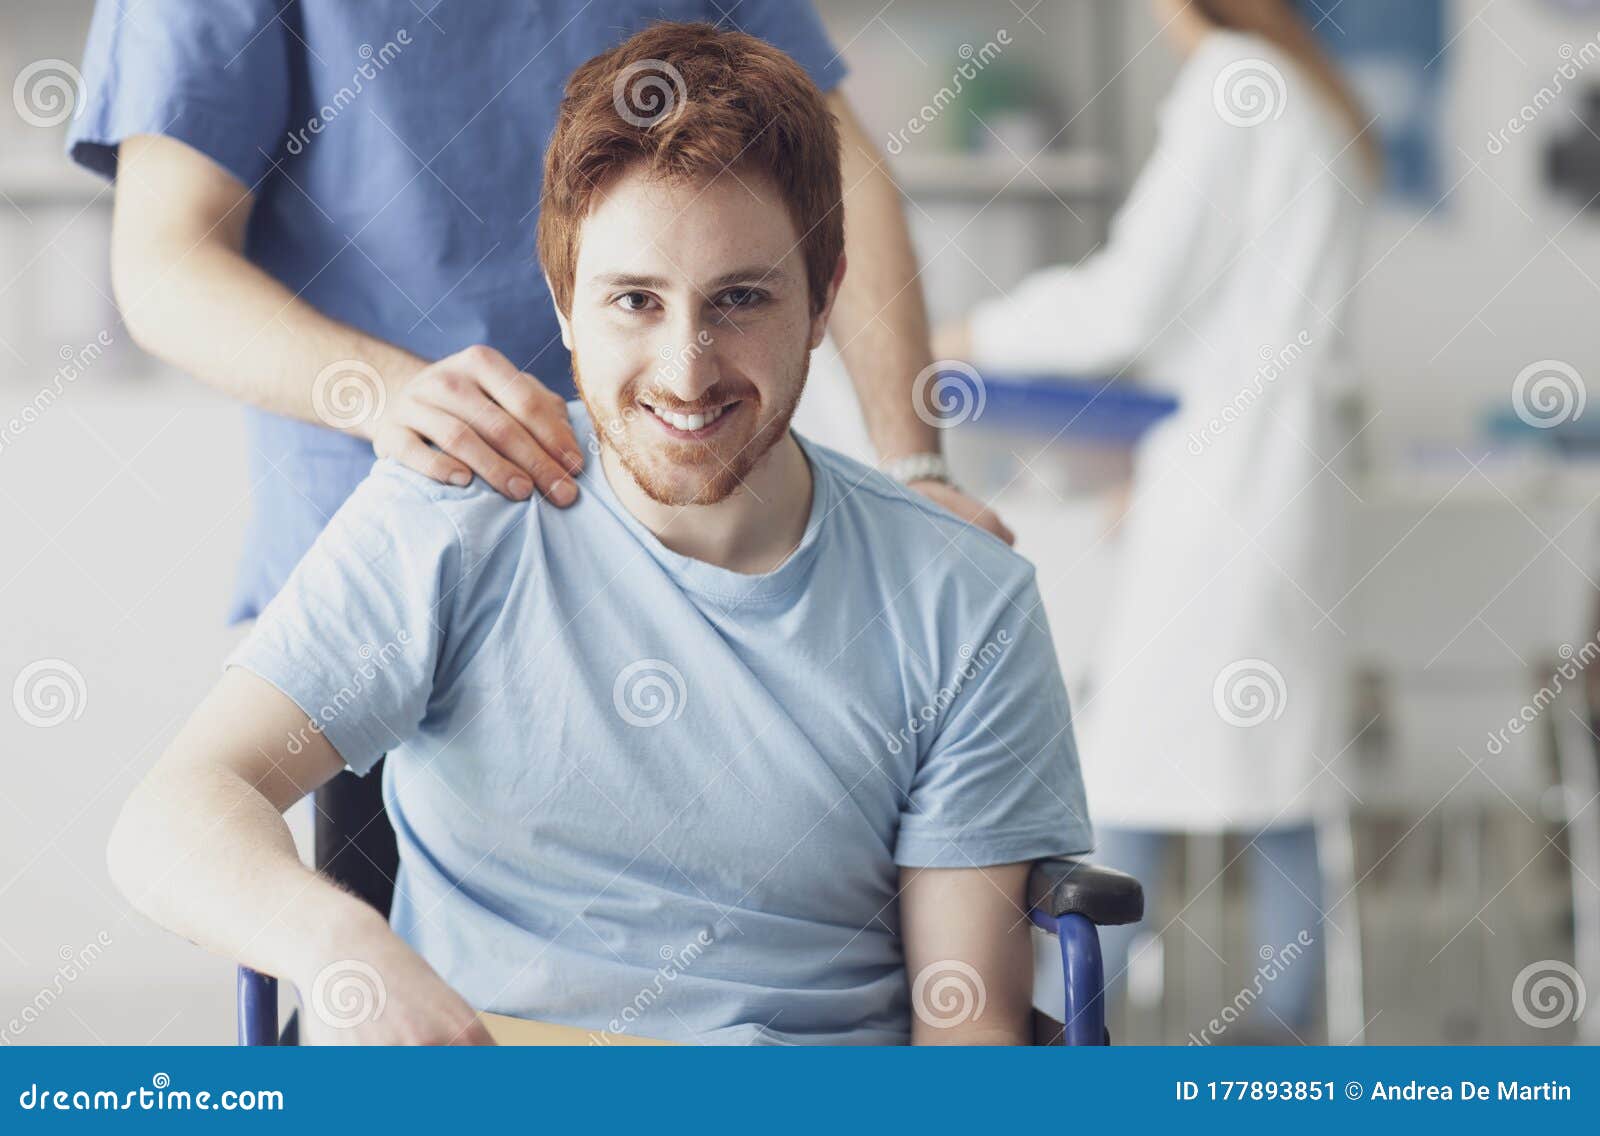 healthcare worker pushing a man in wheelchair